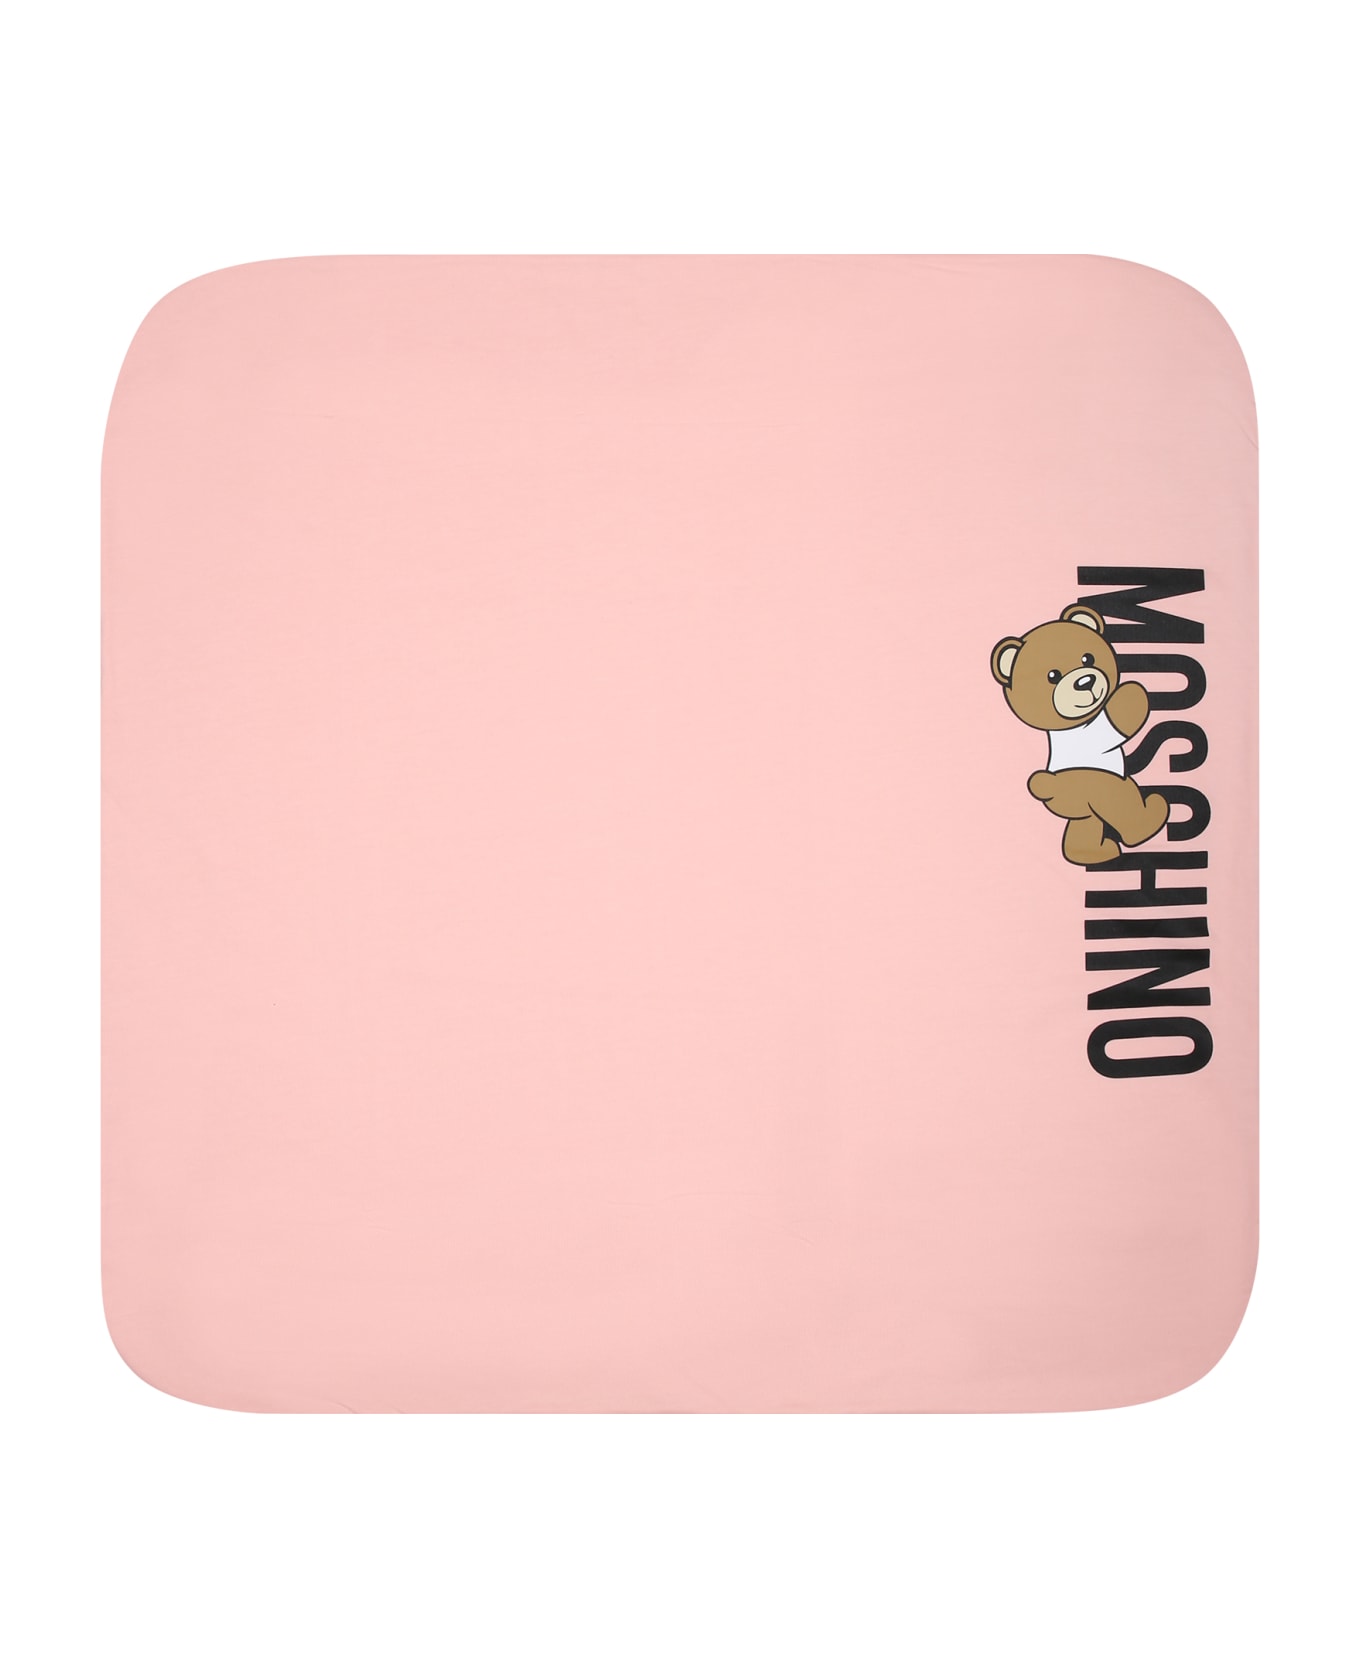 Moschino Pink Blanket For Baby Boy With Teddy Bear And Logo - Pink アクセサリー＆ギフト